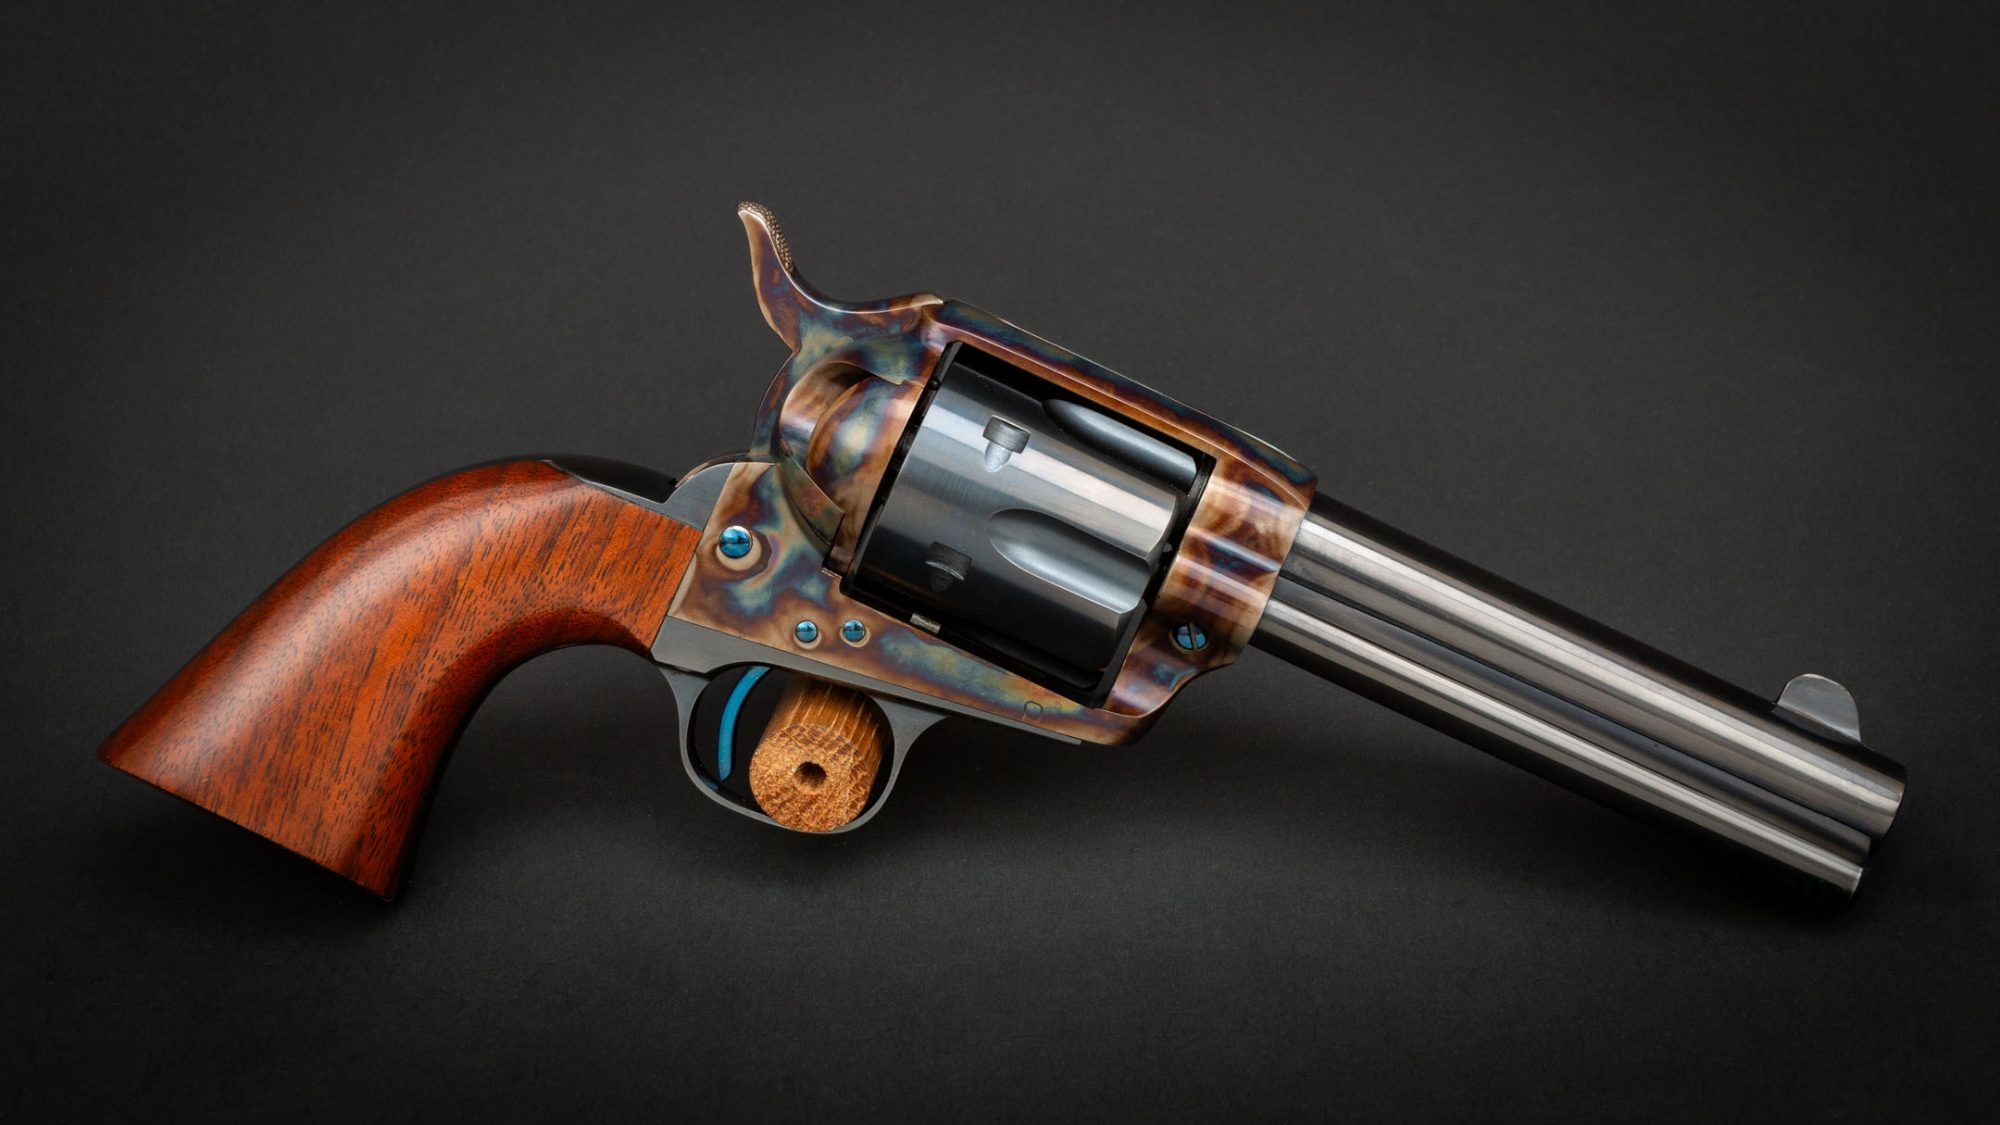 U.S. Fire Arms single action revolver in 45 Colt featuring Turnbull finishes, for sale by Turnbull Restoration of Bloomfield, NY